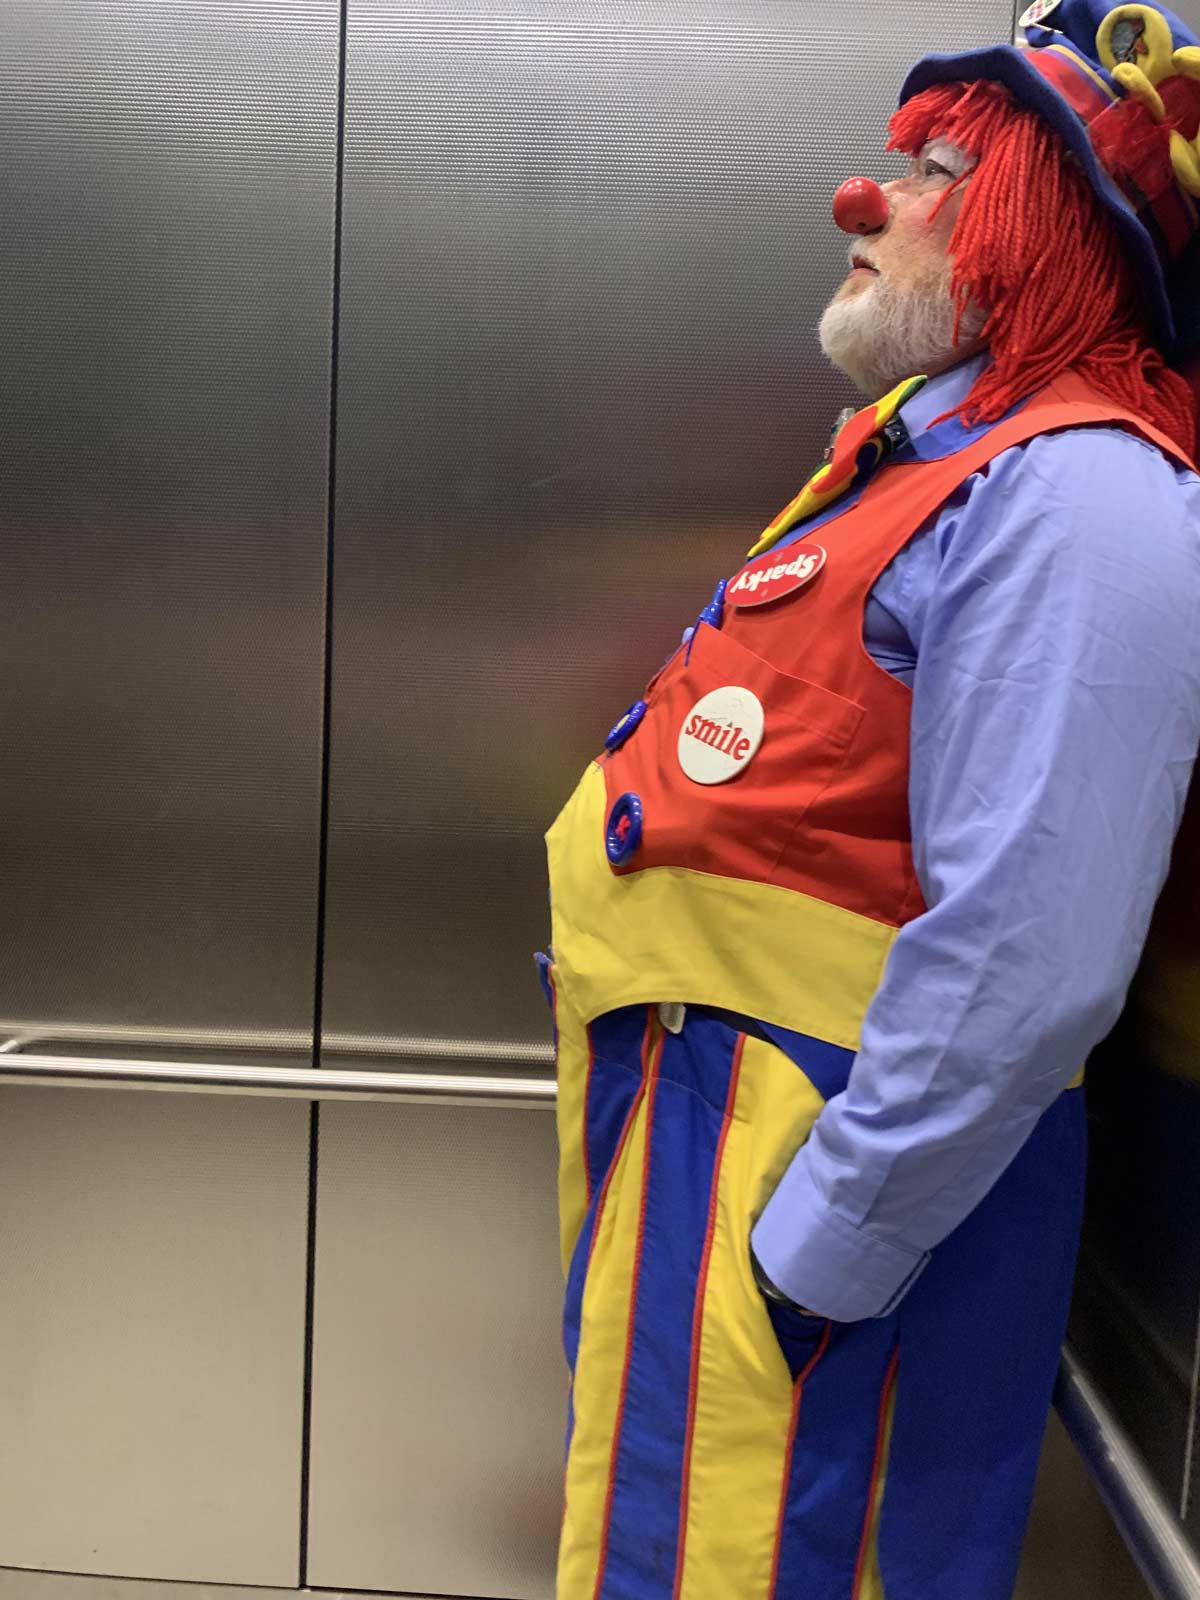 Had an elevator ride recently with this guy